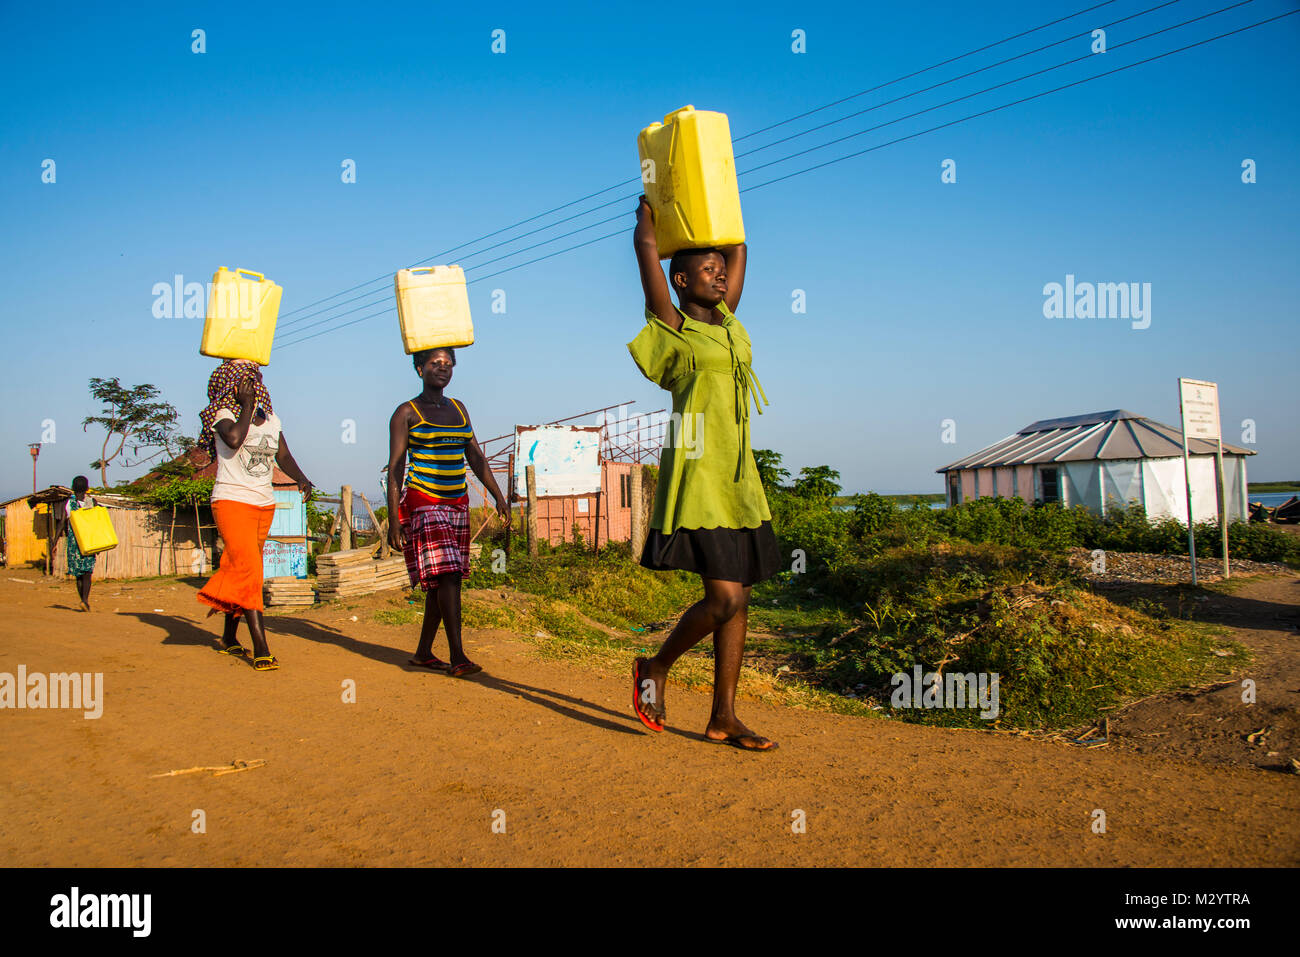 Women carrying water canisters on their head bringing water home from Lake Albert, Uganda, Africa Stock Photo